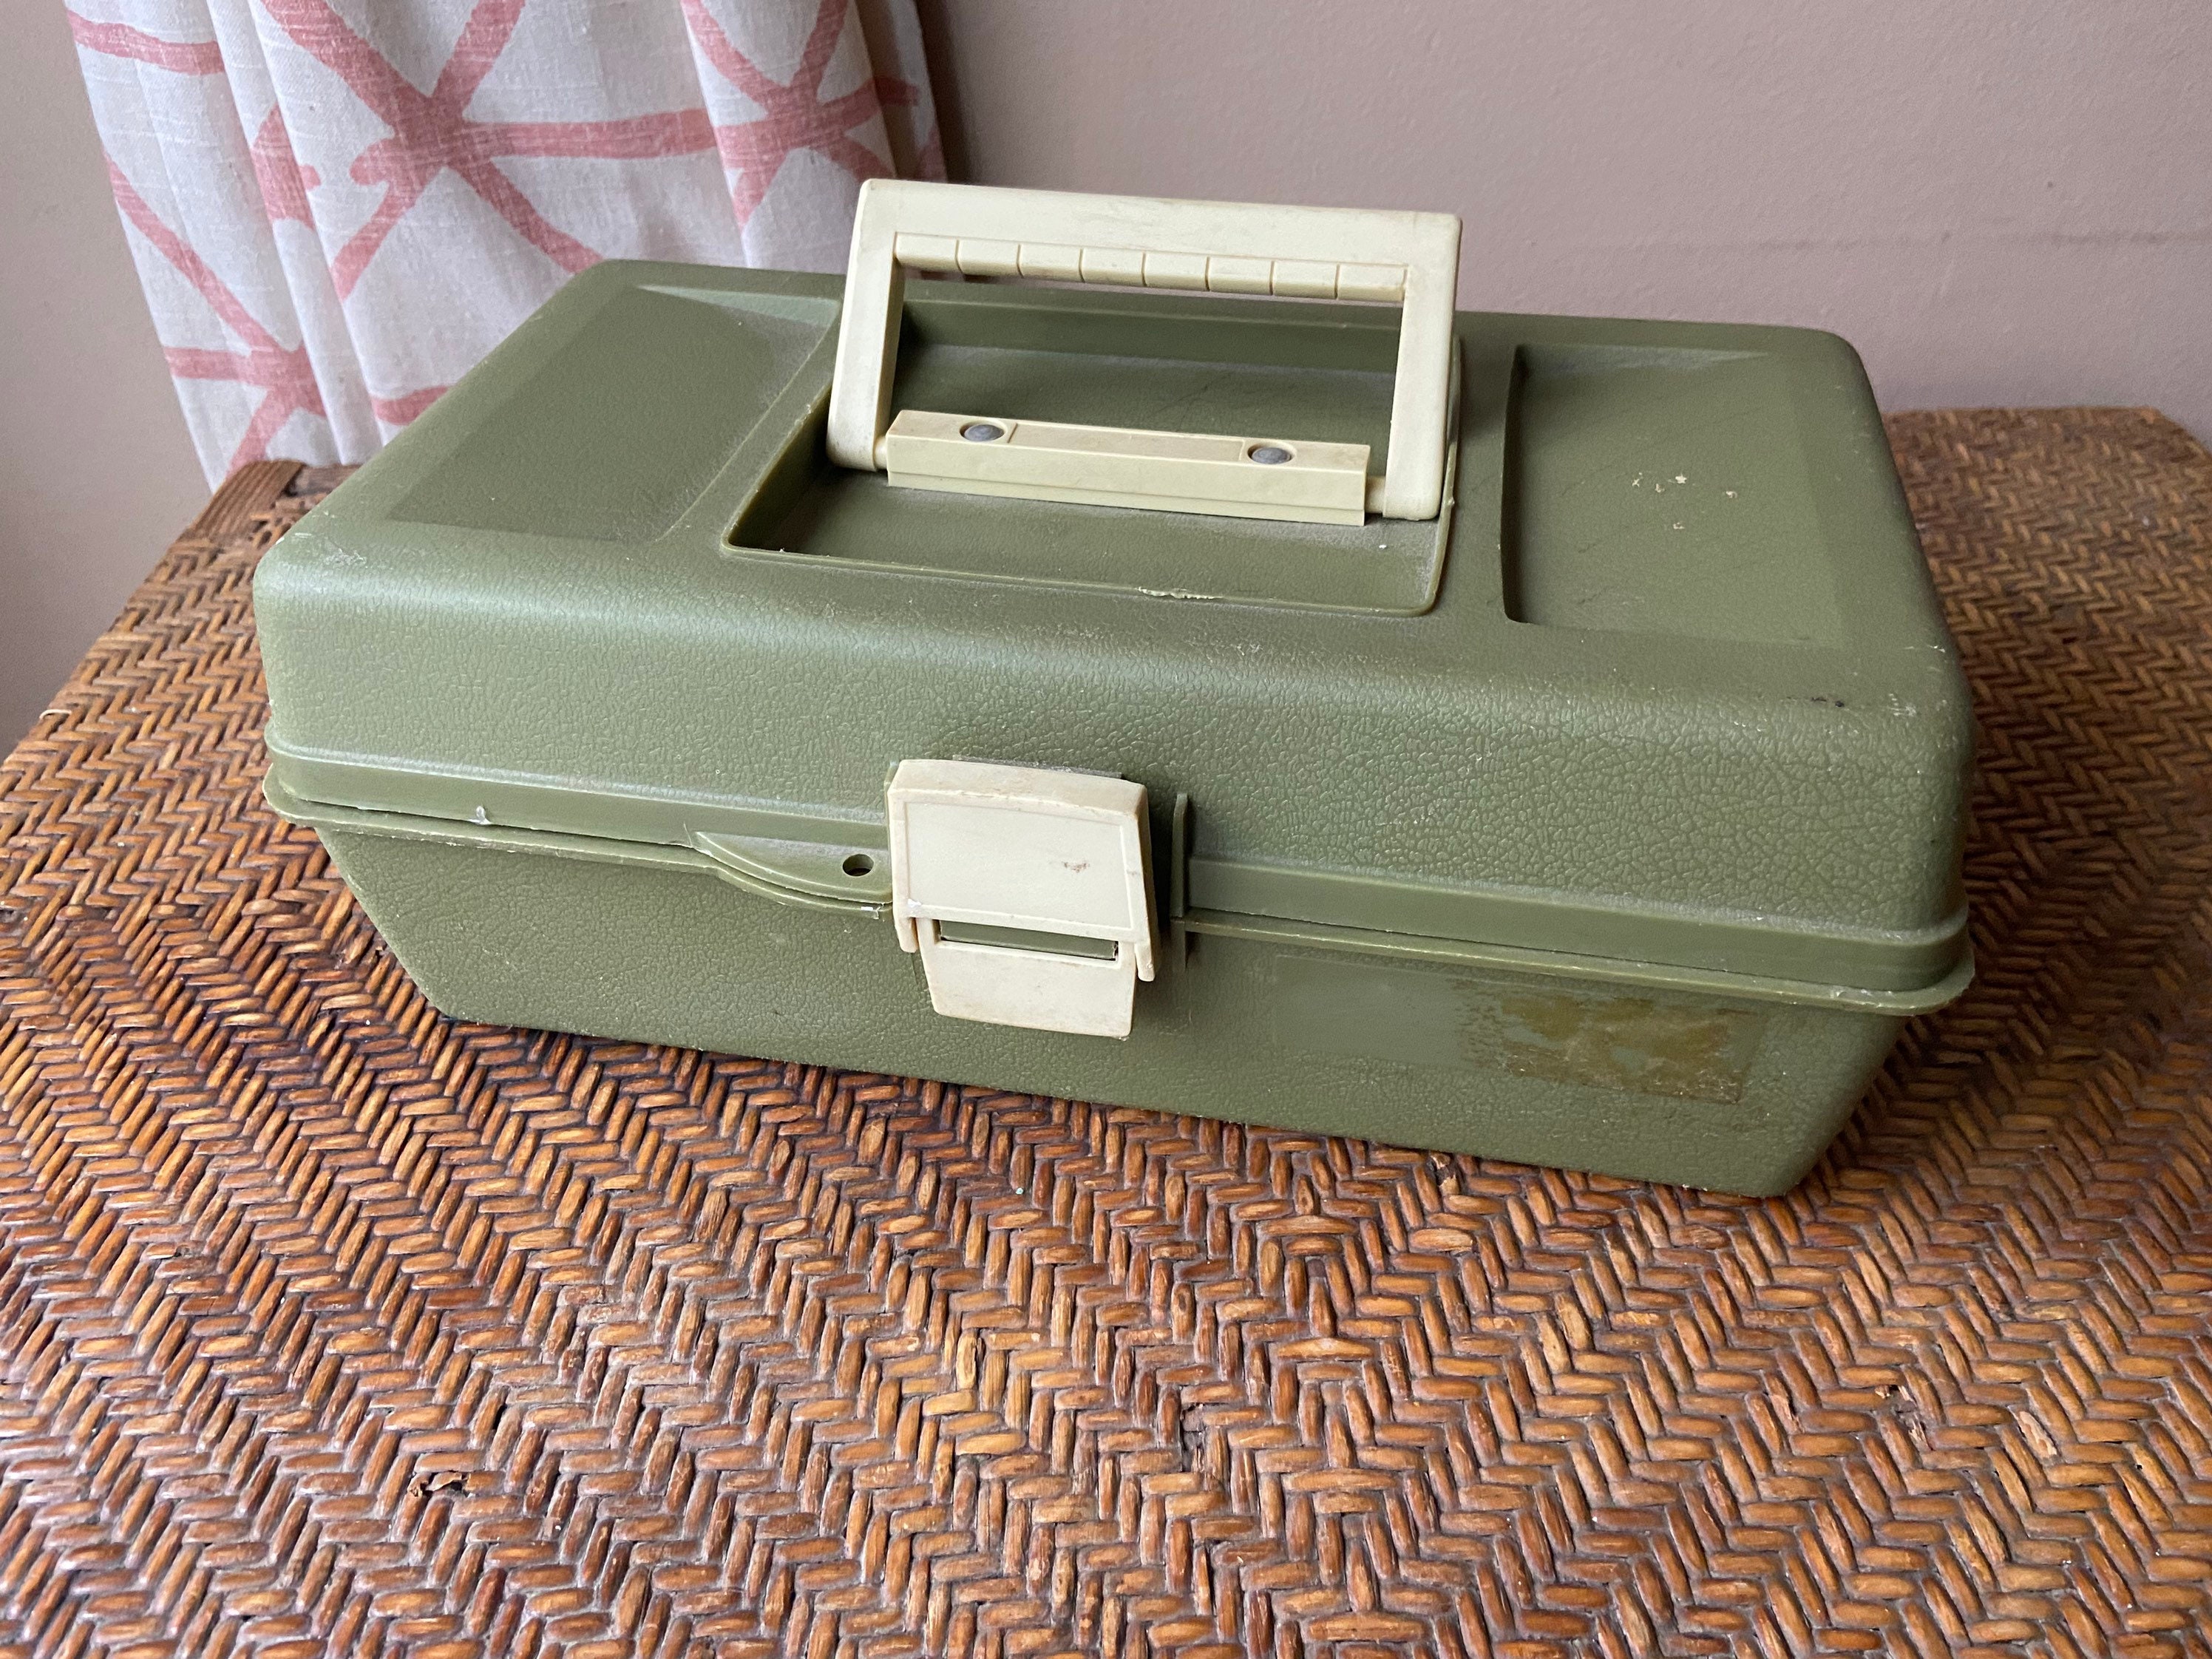 Green Tackle Box, Vintage Tacklebox, Toolbox, Rustic Tool Storage, Fishing  Tackle Carrier, Vintage Storage, Industrial Decor, Utility -  Canada